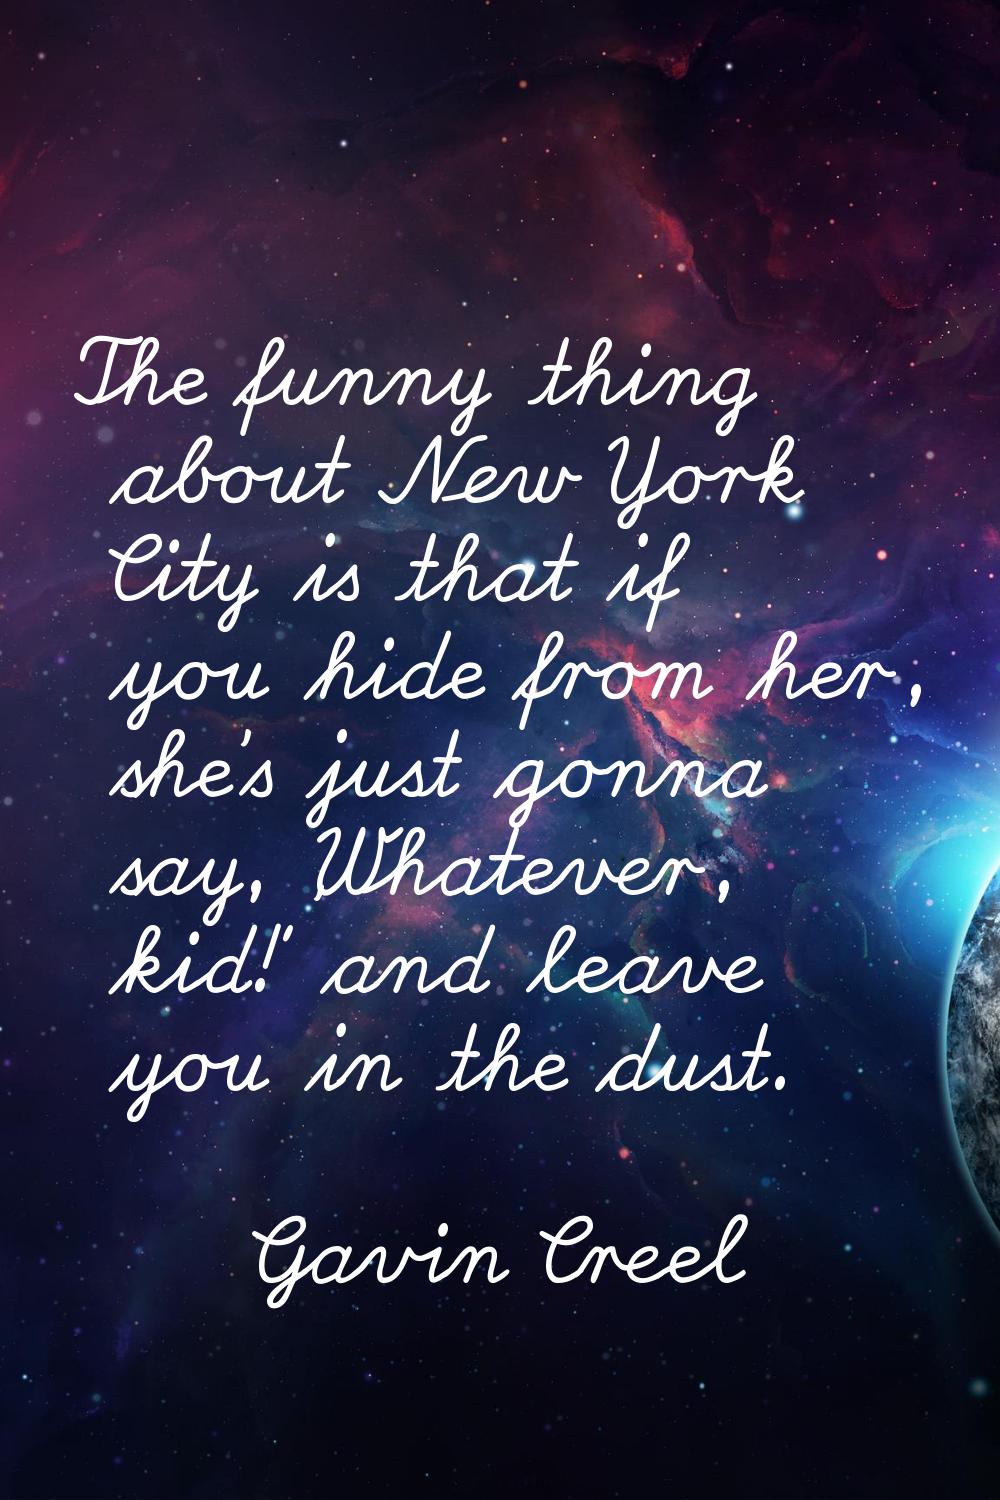 The funny thing about New York City is that if you hide from her, she's just gonna say, 'Whatever, 